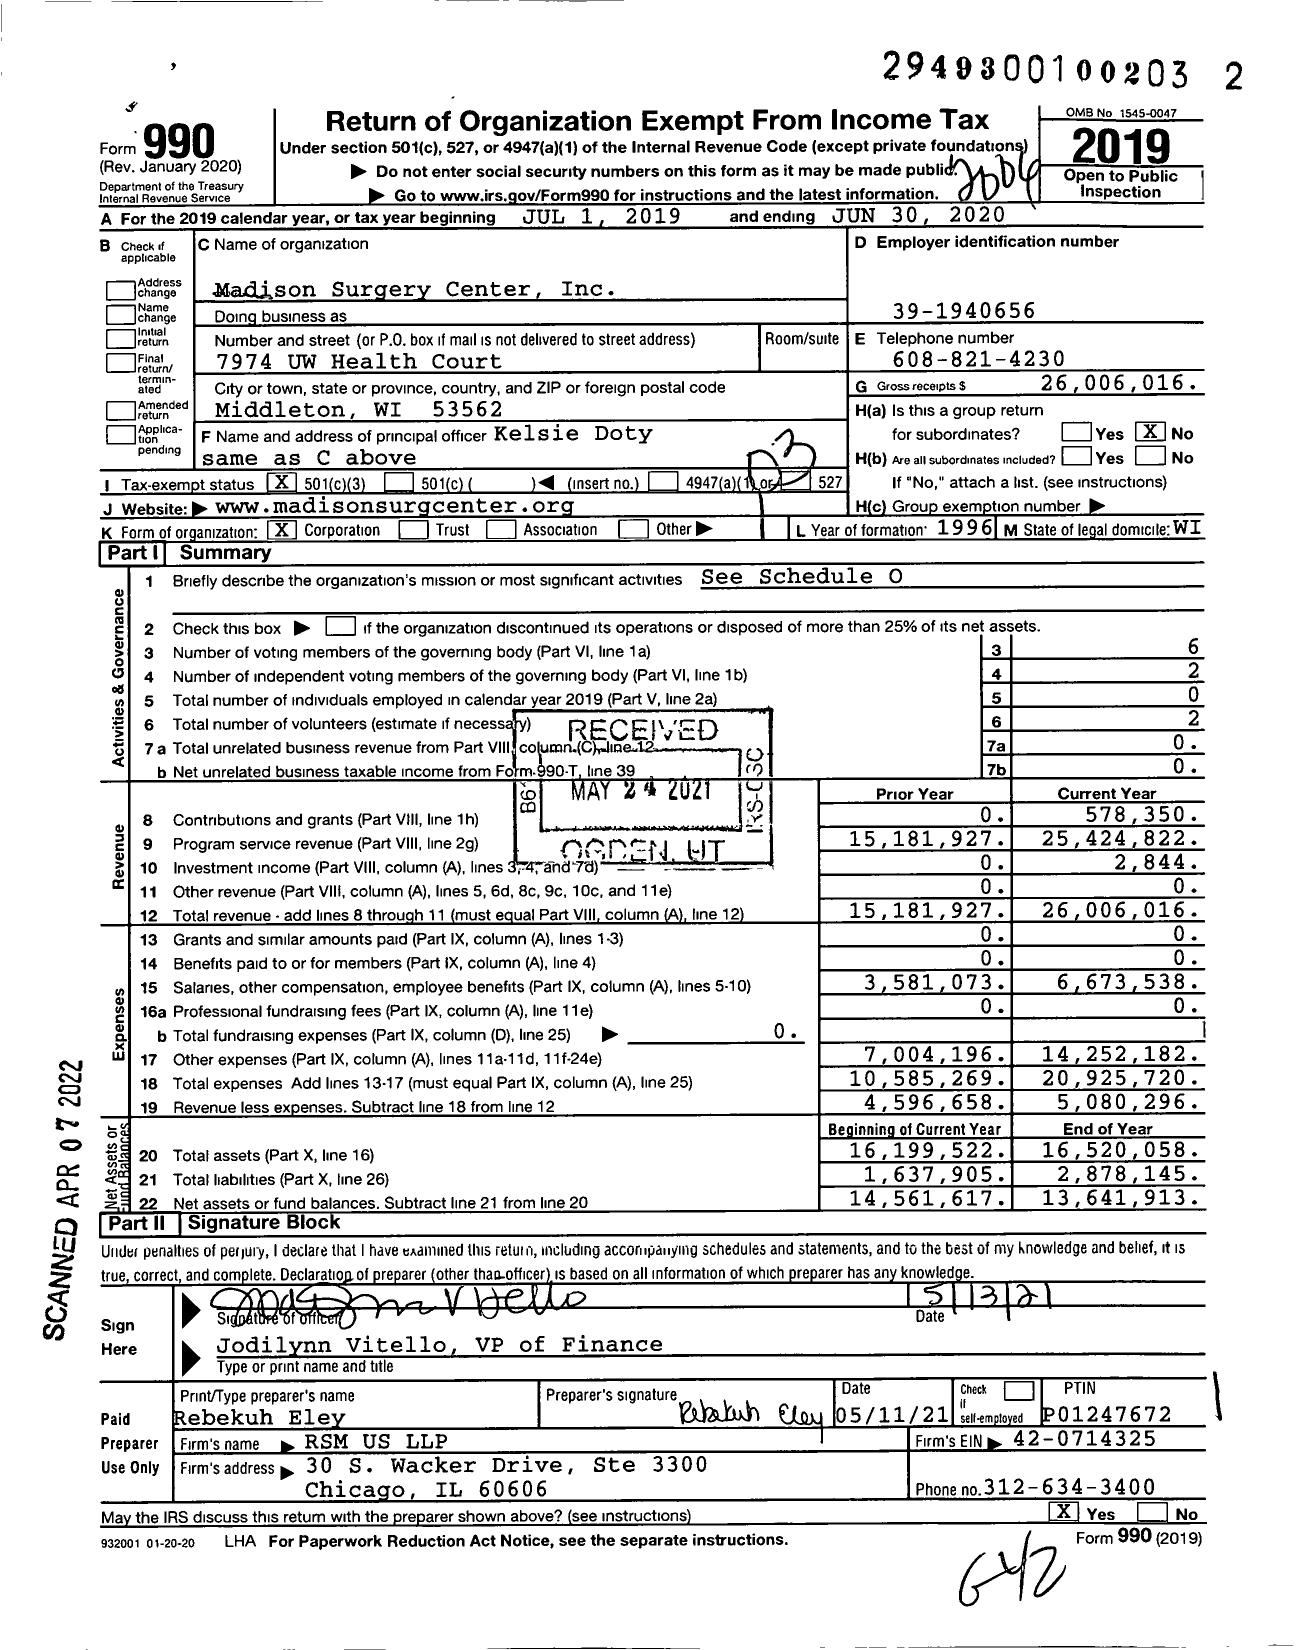 Image of first page of 2019 Form 990 for Madison Surgery Center (MSC)